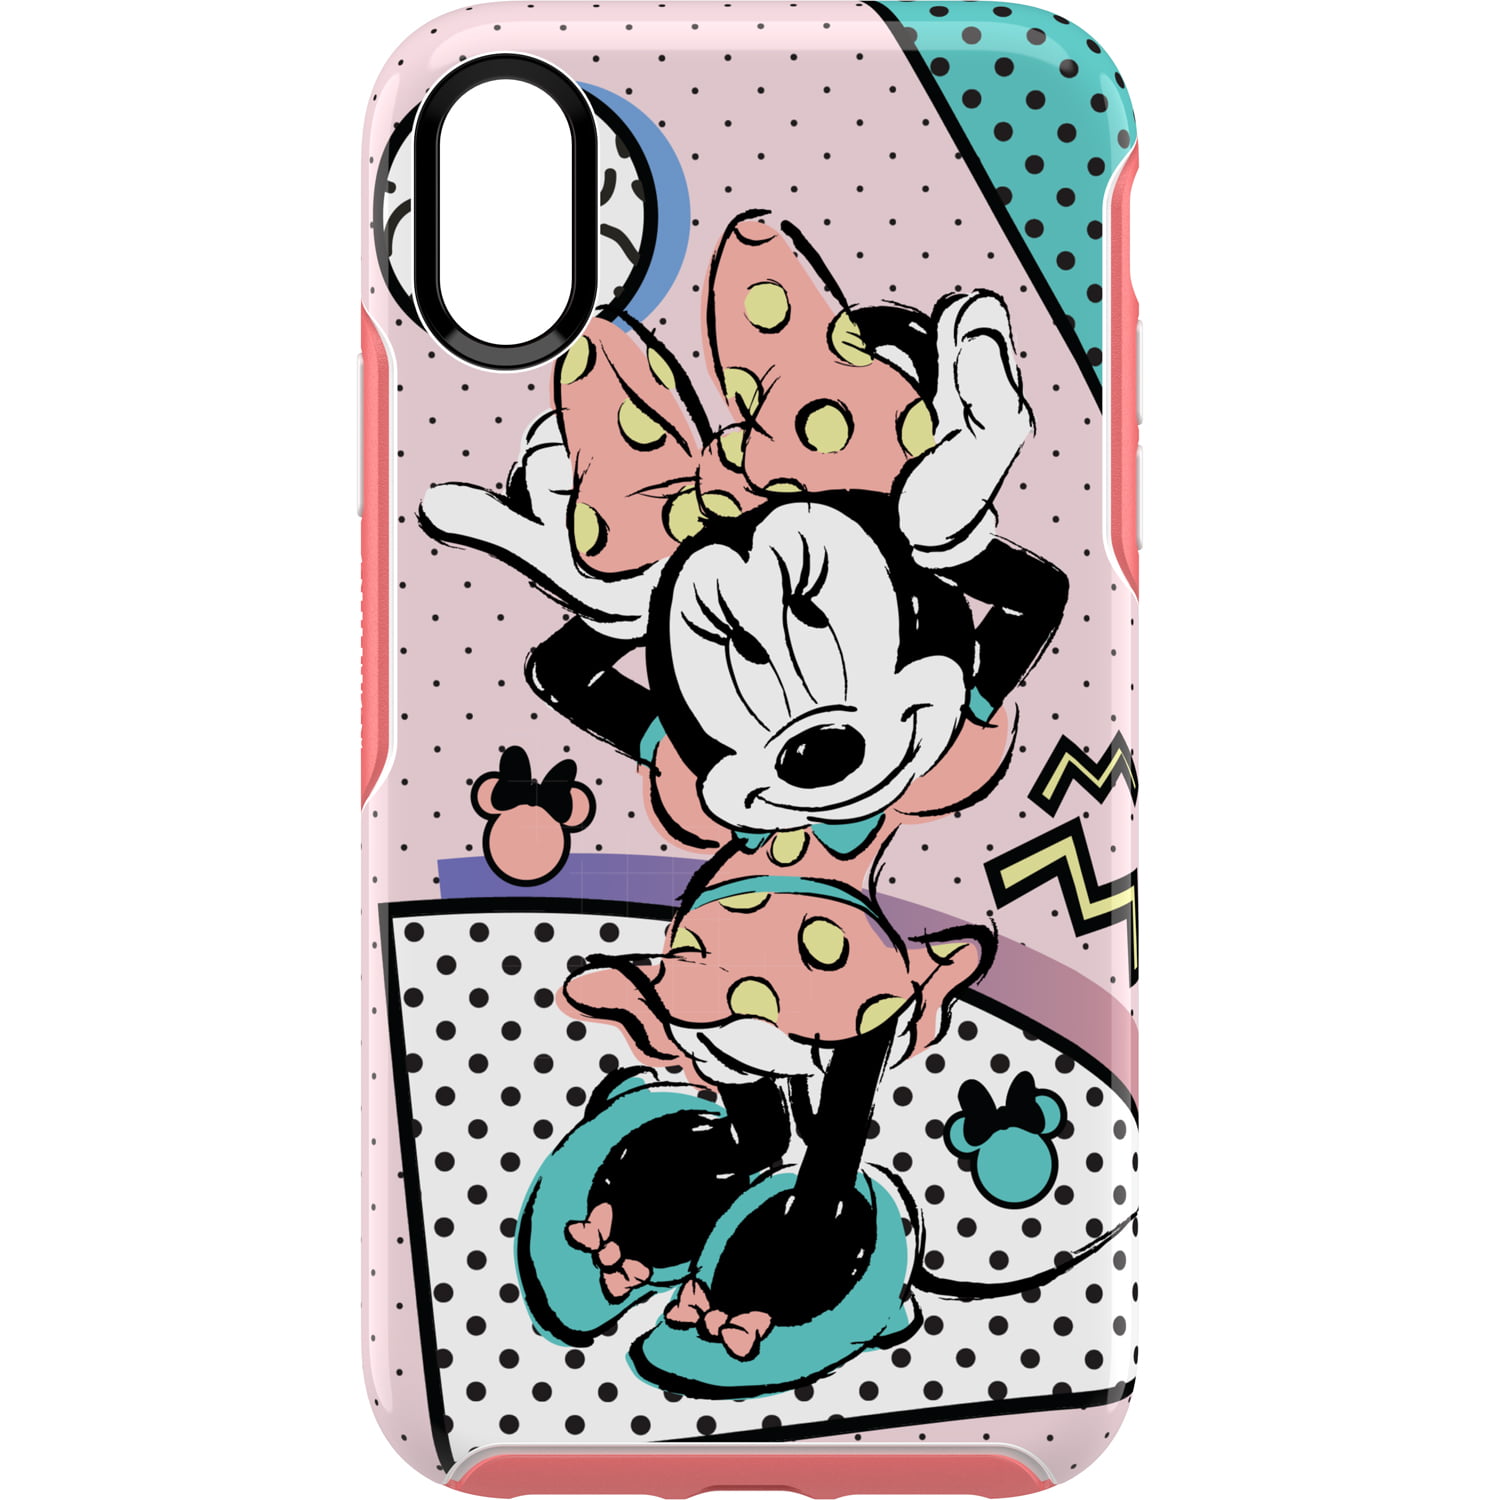 OtterBox Symmetry Series Case for iPhone XR, Rad Minnie